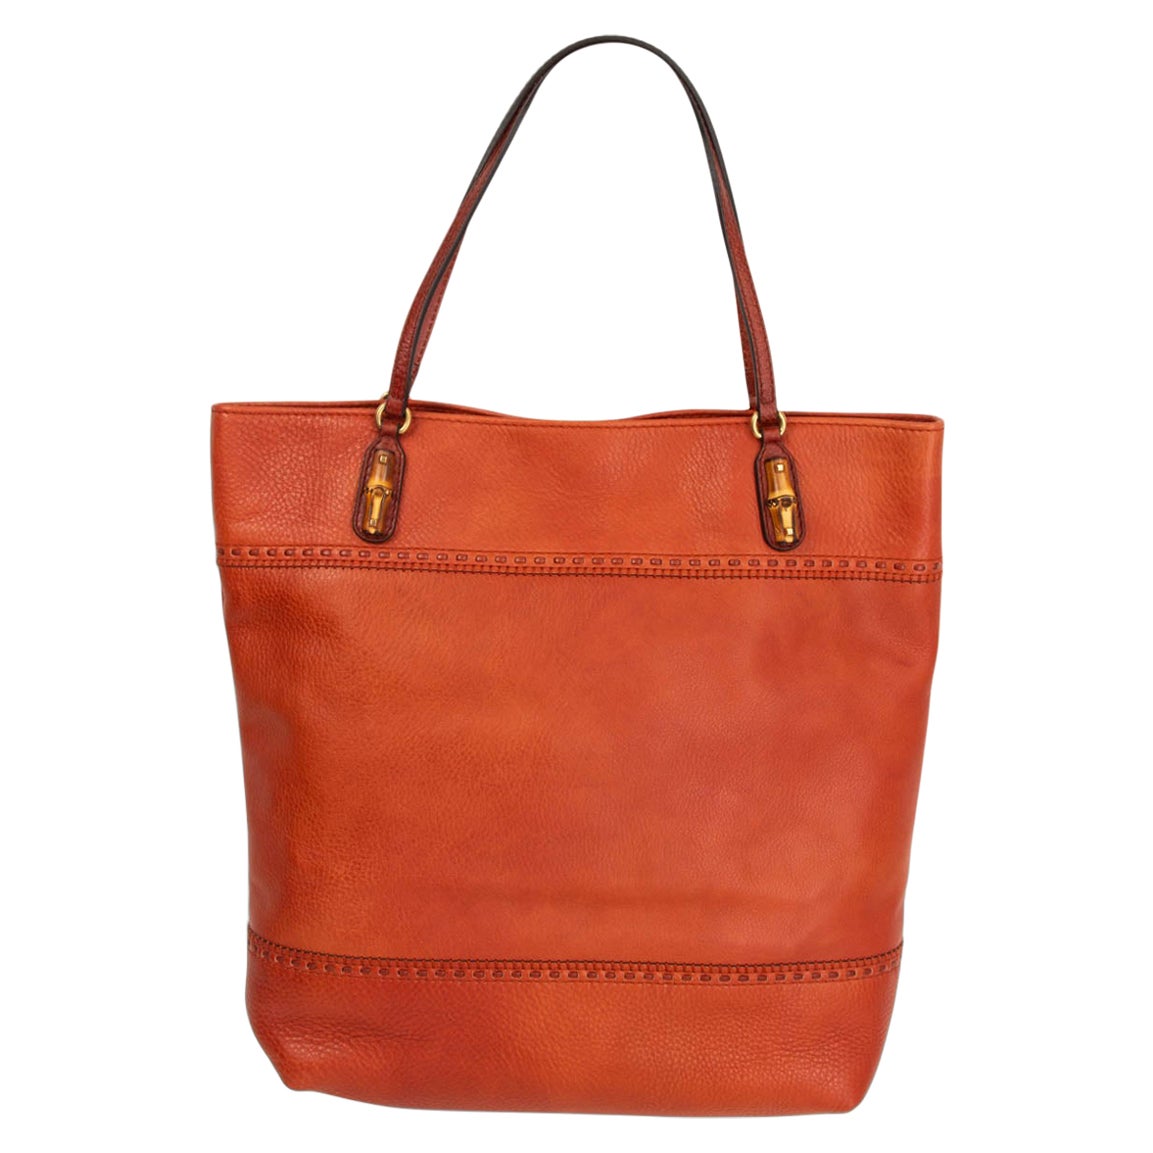 GUCCI brick red leather BAMBOO DETAILED Tote Bag